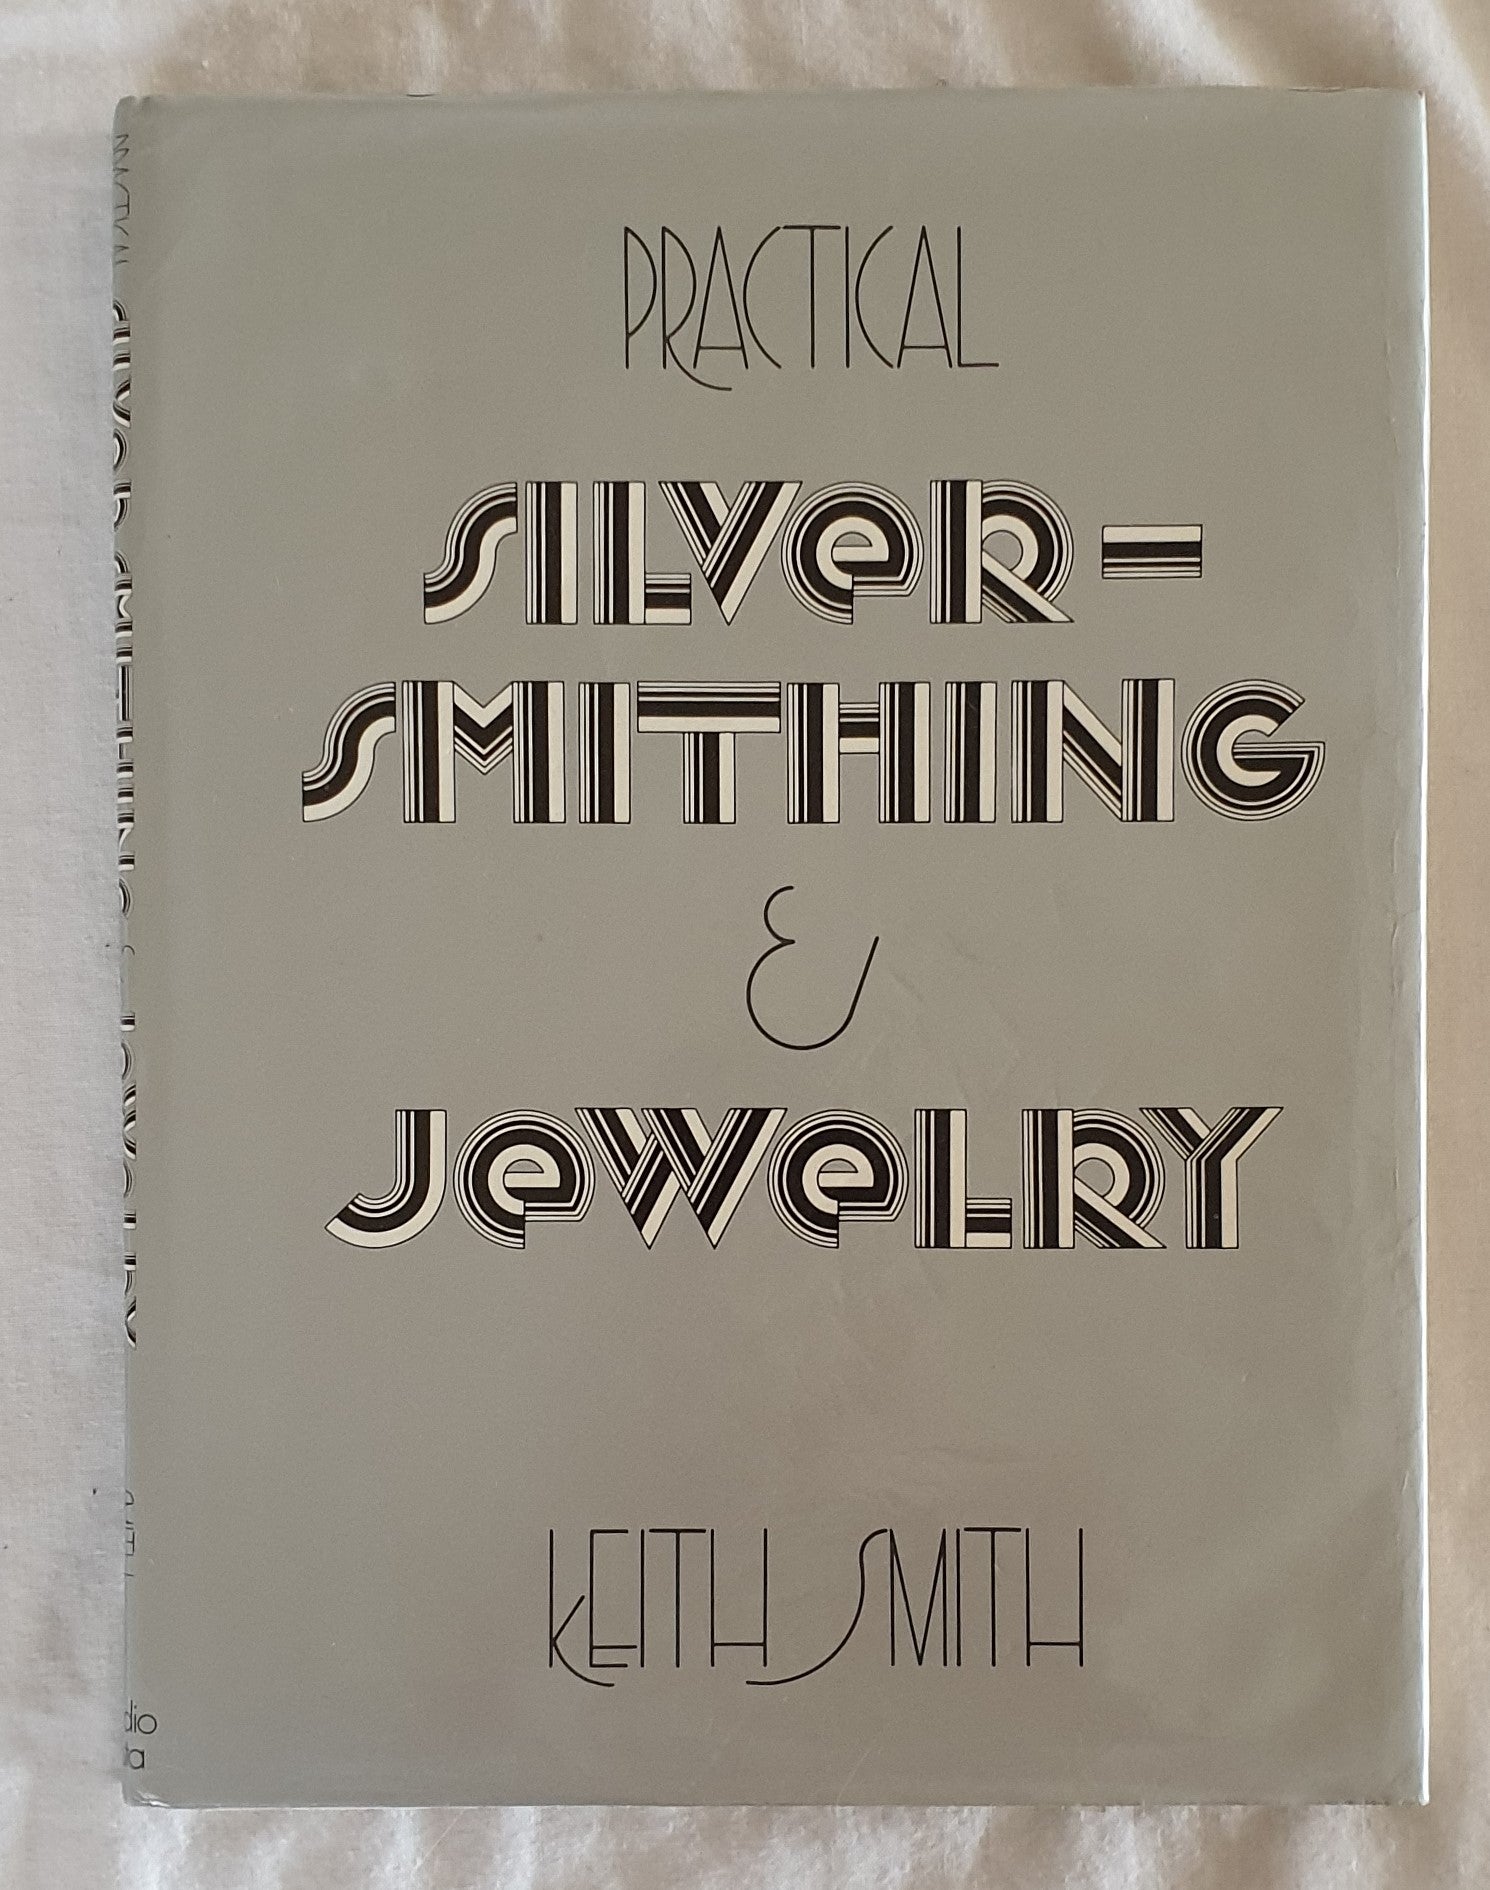 Practical Silver-Smithing & Jewelry  by Keith Smith